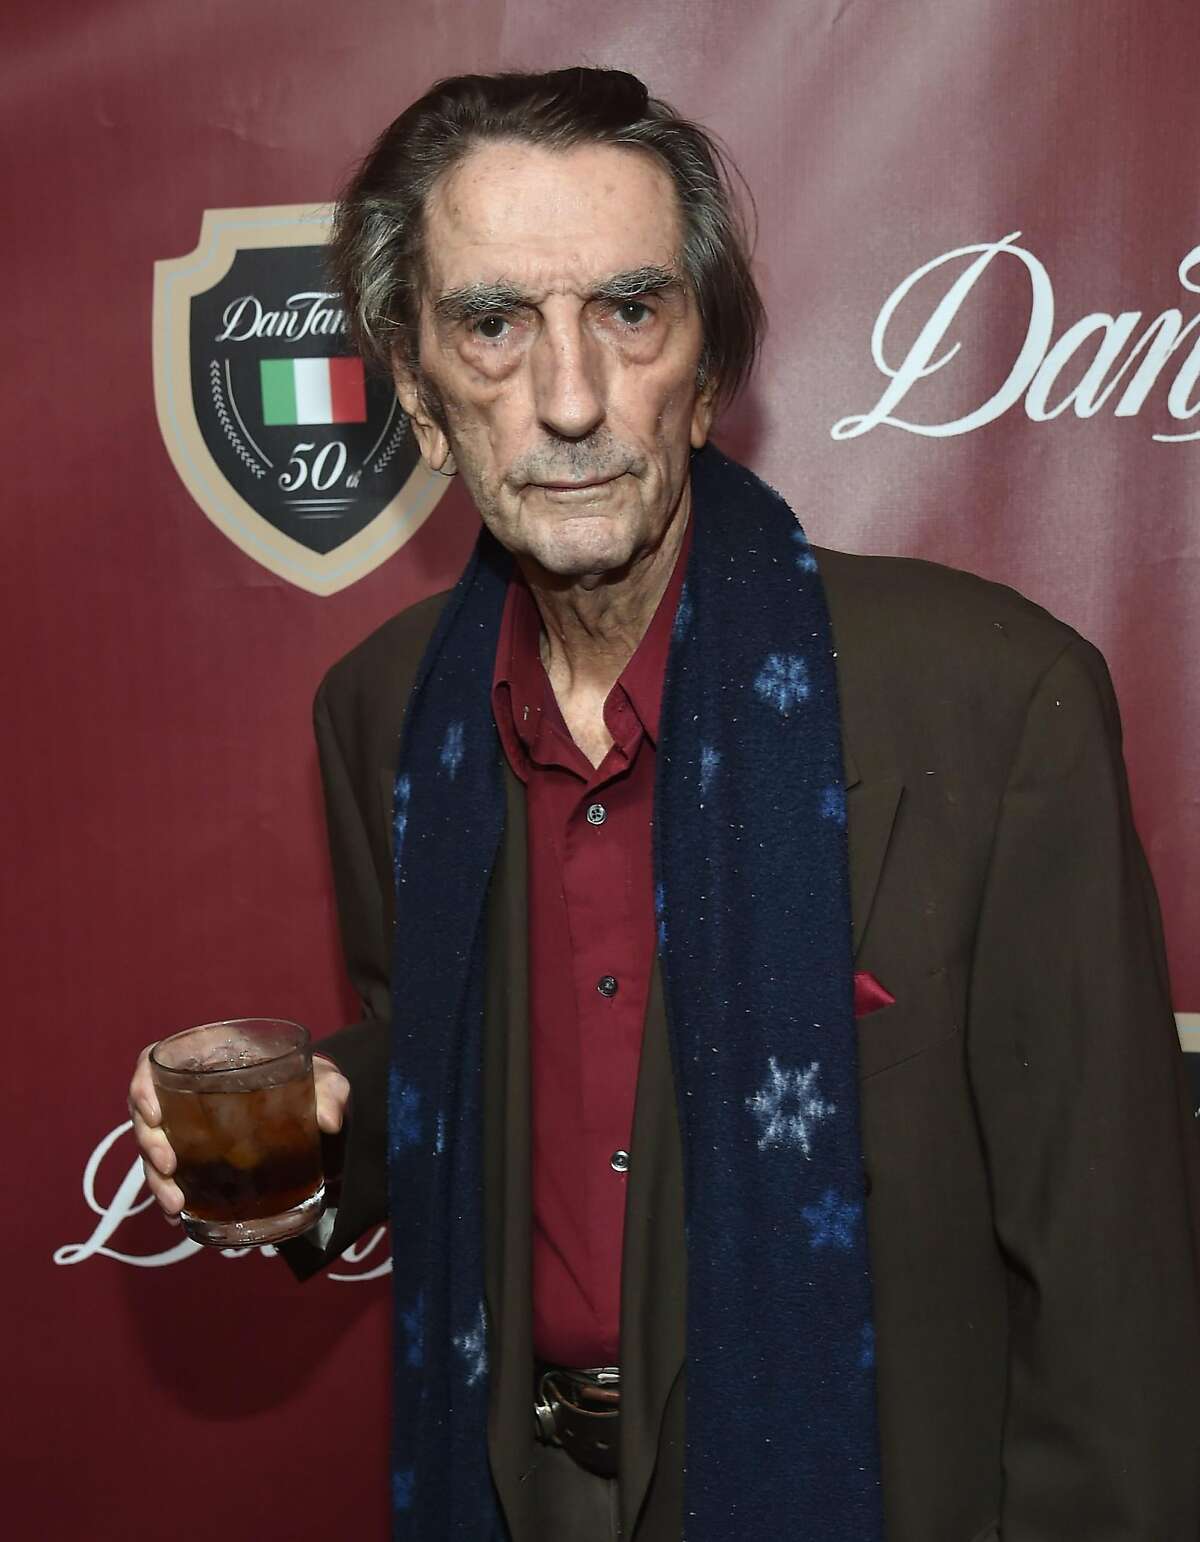 FILE - SEPTEMBER 15: Actor Harry Dean Stanton has died at 91 years old. Stanton was known for his roles in films such as "Paris, Texas," "Alien," "Cool Hand Luke," and "Pretty in Pink." WEST HOLLYWOOD, CA - OCTOBER 01: Actor Harry Dean Stanton attends Dan Tana's 50th Anniversary Party at Dan Tana's Restaurant on October 1, 2014 in West Hollywood, California. (Photo by Alberto E. Rodriguez/Getty Images)